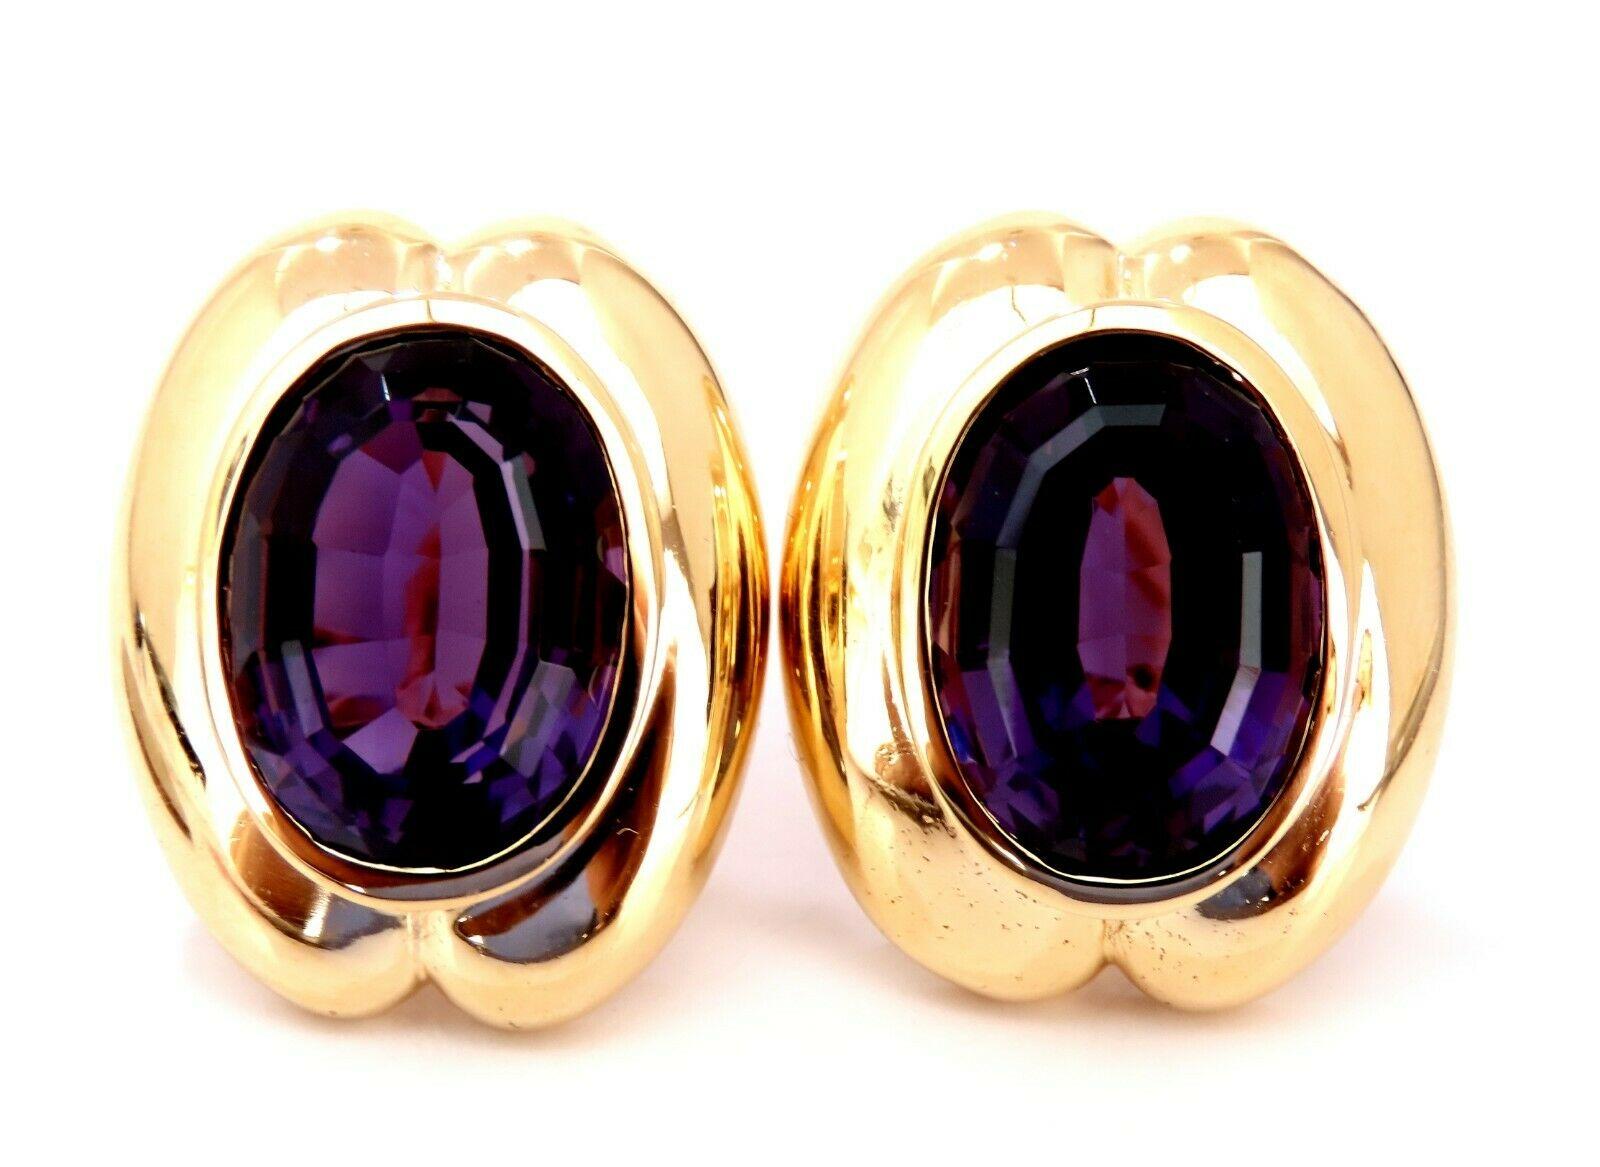 Natural Vivid Purple Amethyst Clip Earrings.

34ct natural vivid purple amethyst.

14x11 mm each

14 karat yellow gold 18.9 grams

Overall earrings: 24 x 20mm

Depth: 10mm

$7000 appraisal to accompany